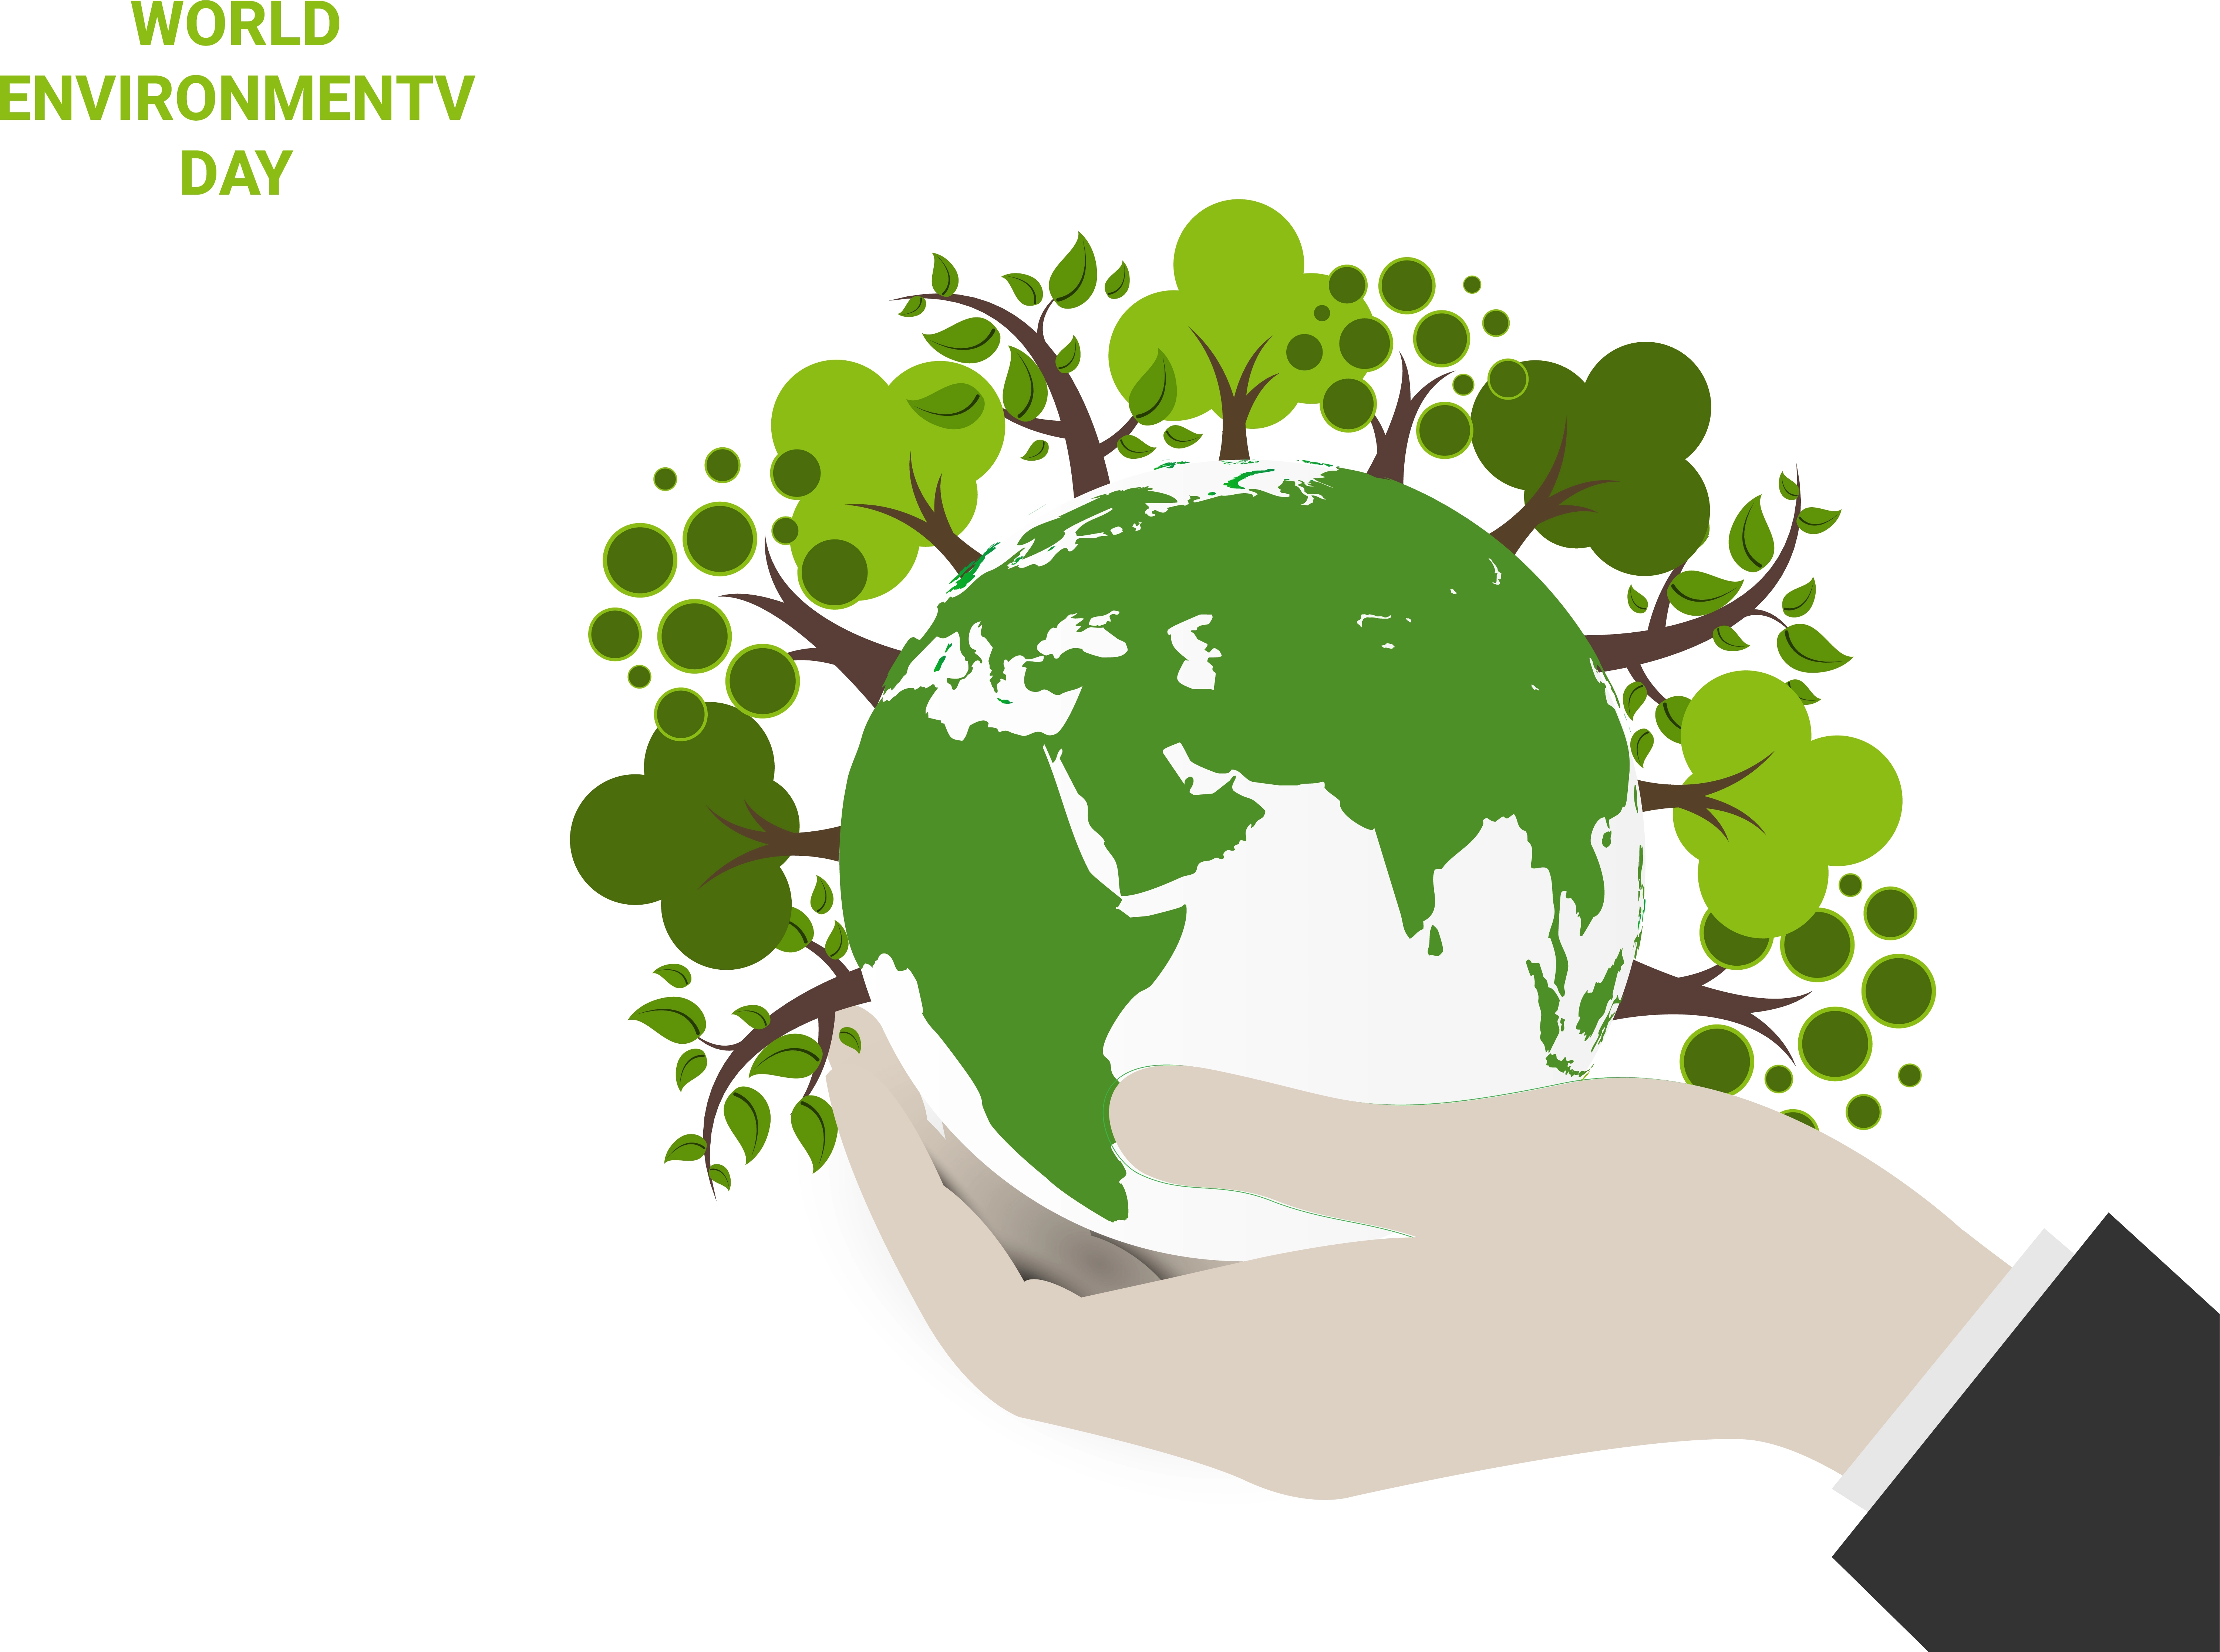 vector-save-earth-planet-world-concept-world-environment-day-concept-ecology-eco-friendly-concept-green-natural-leaf-and-tree-on-earth-globe.jpg